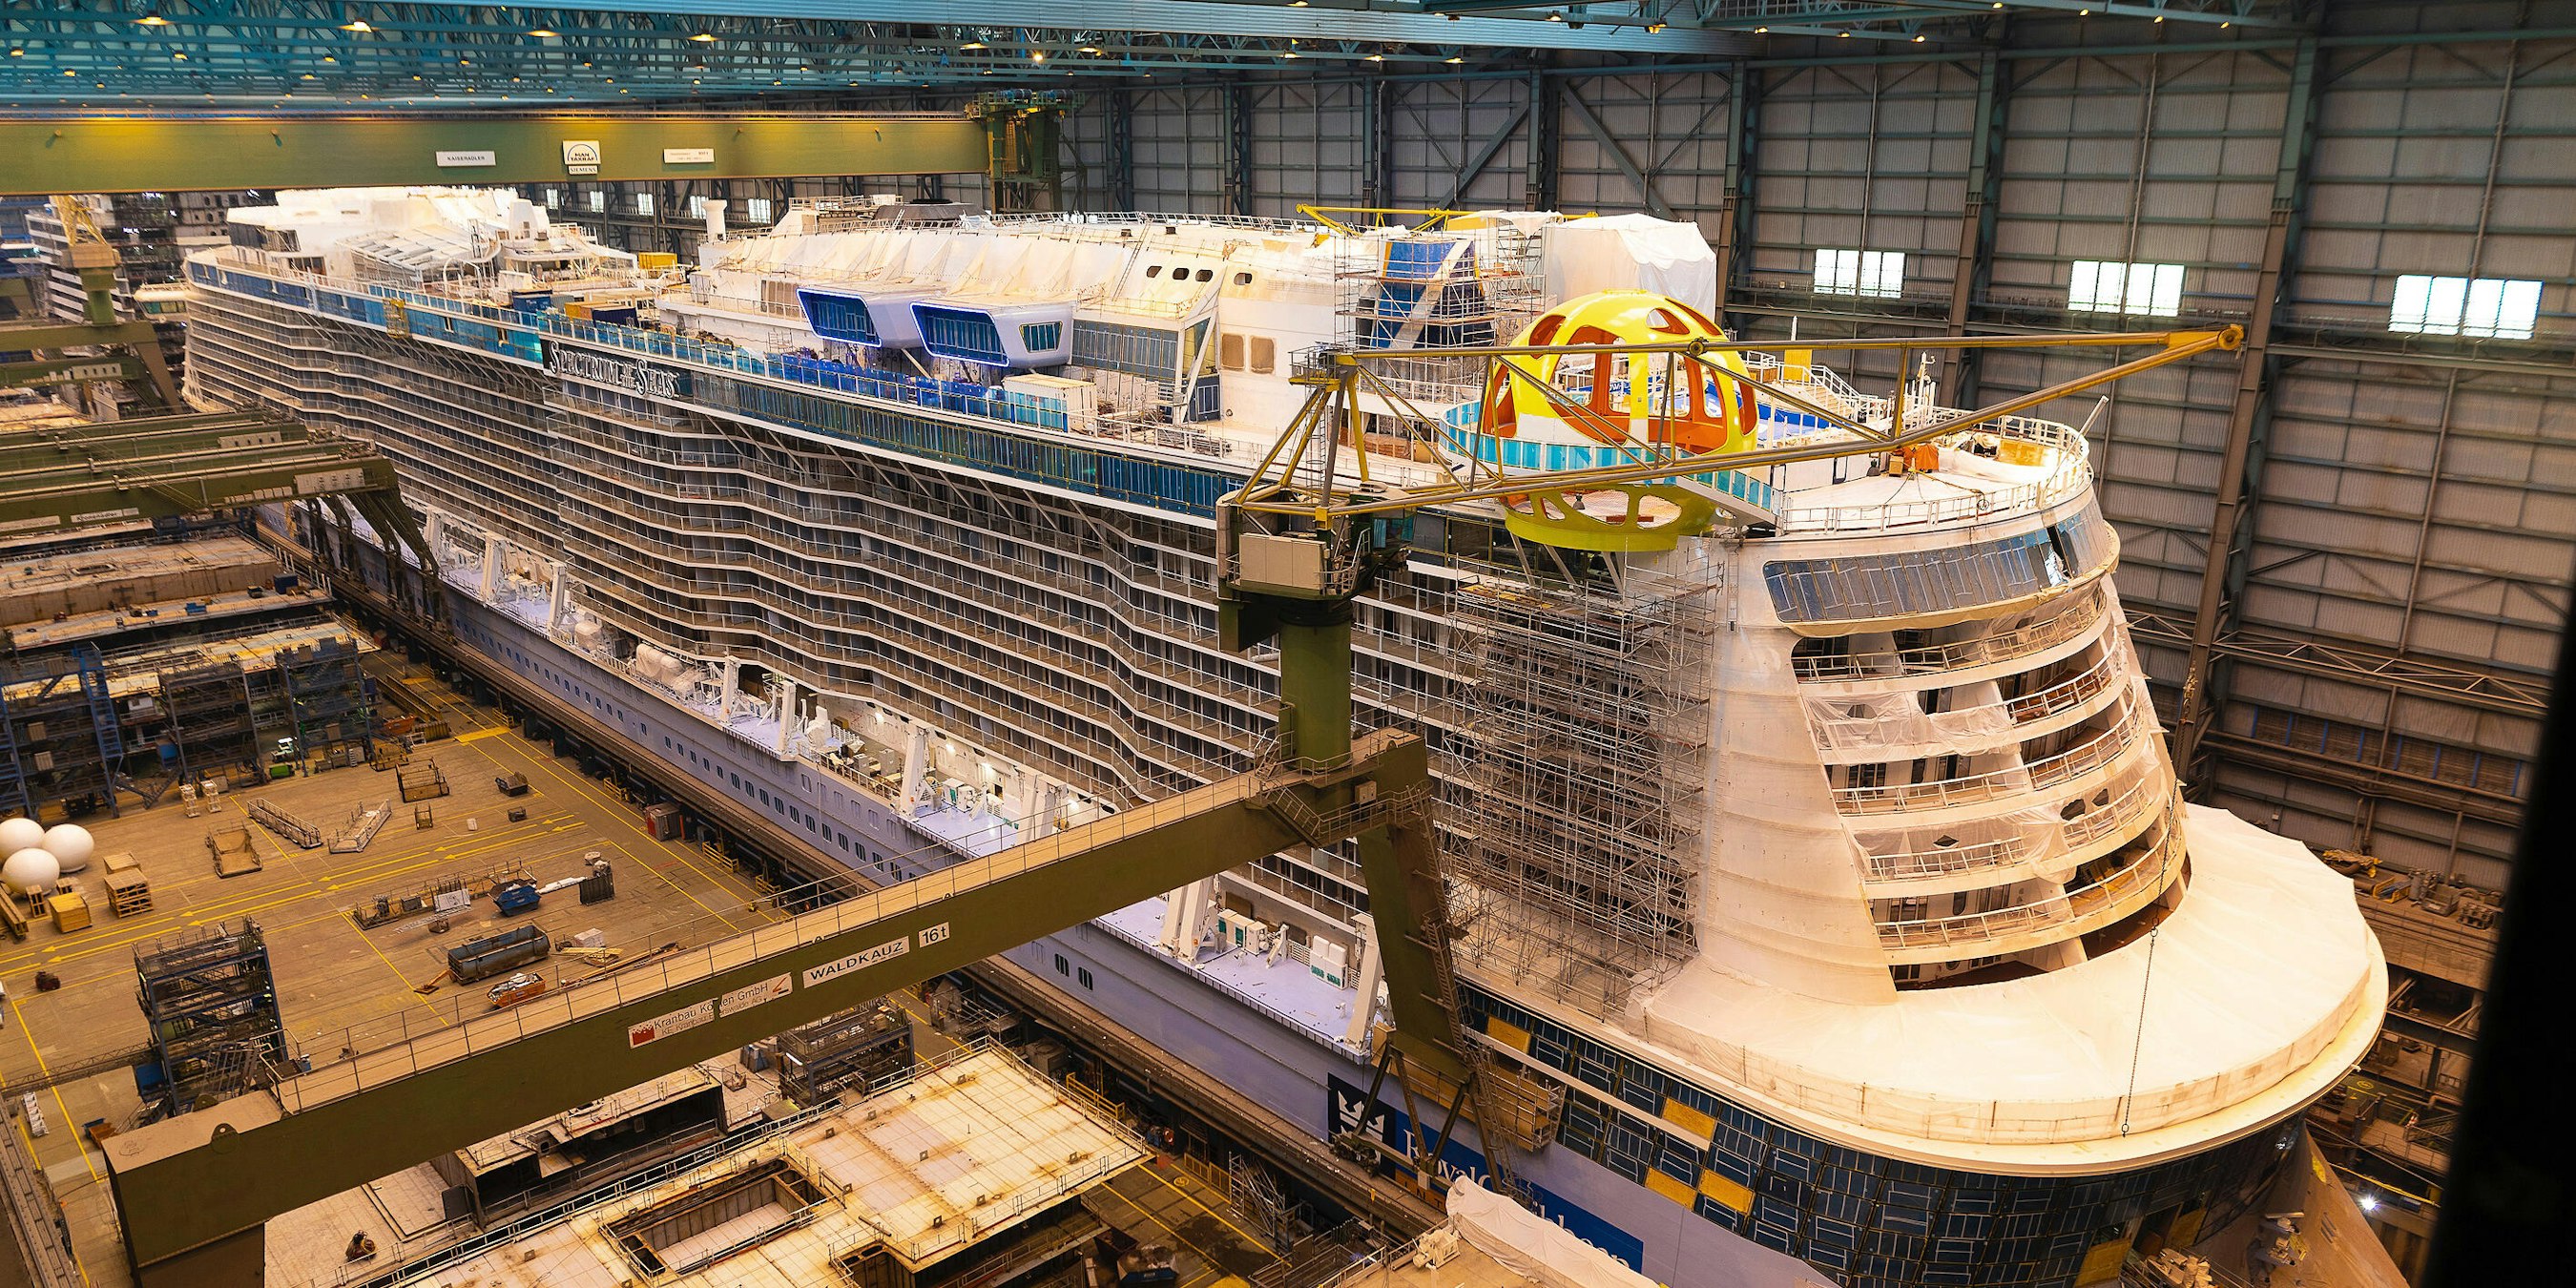 where are celebrity cruise ships built